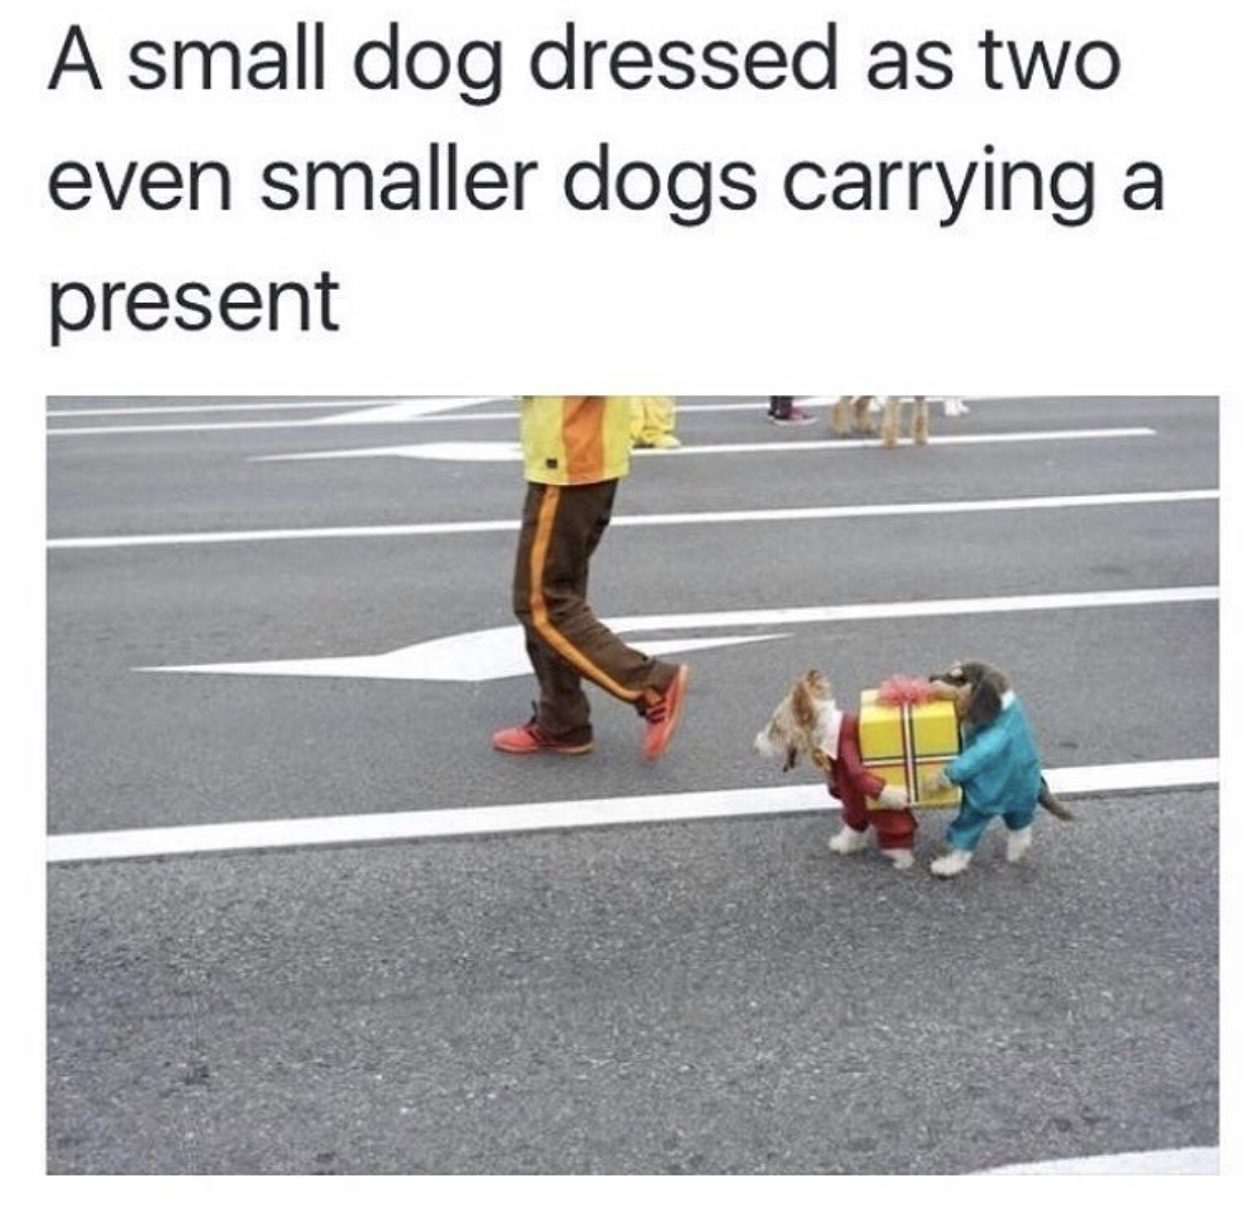 dog costume meme - A small dog dressed as two even smaller dogs carrying a present